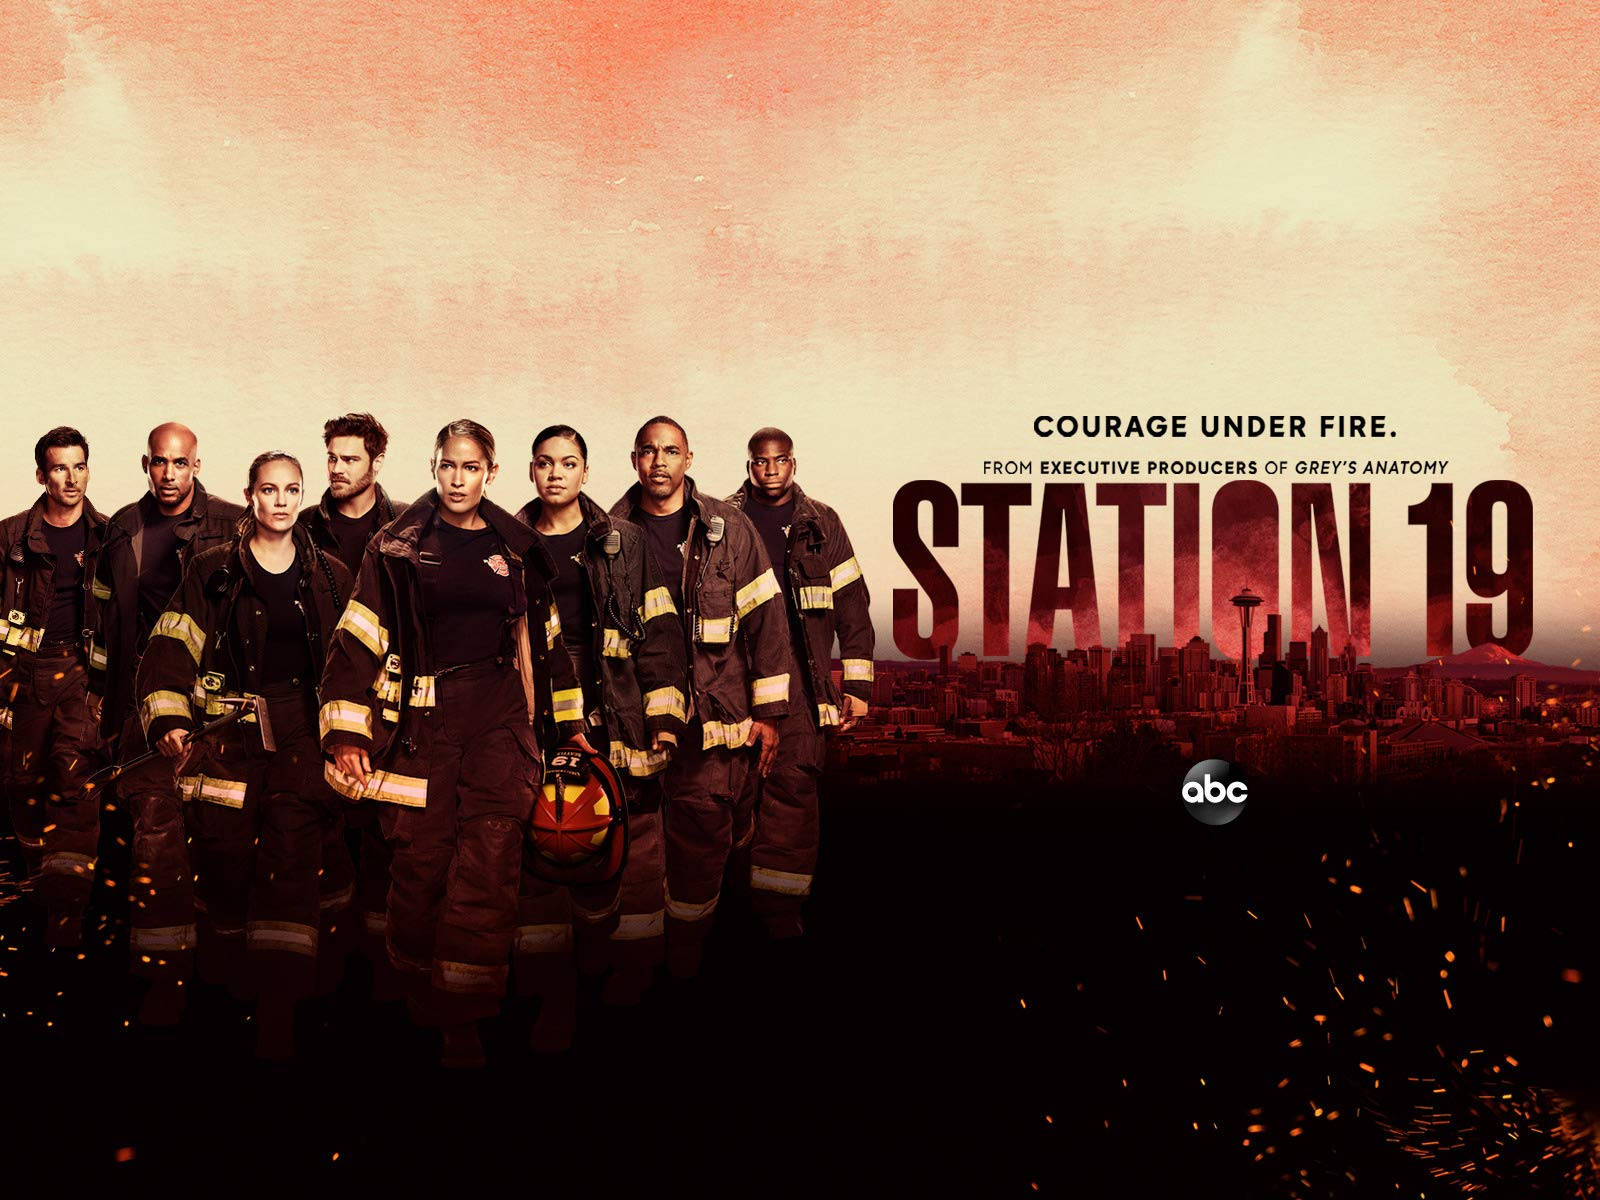 Action-packed Station 19 Promotional Poster Background